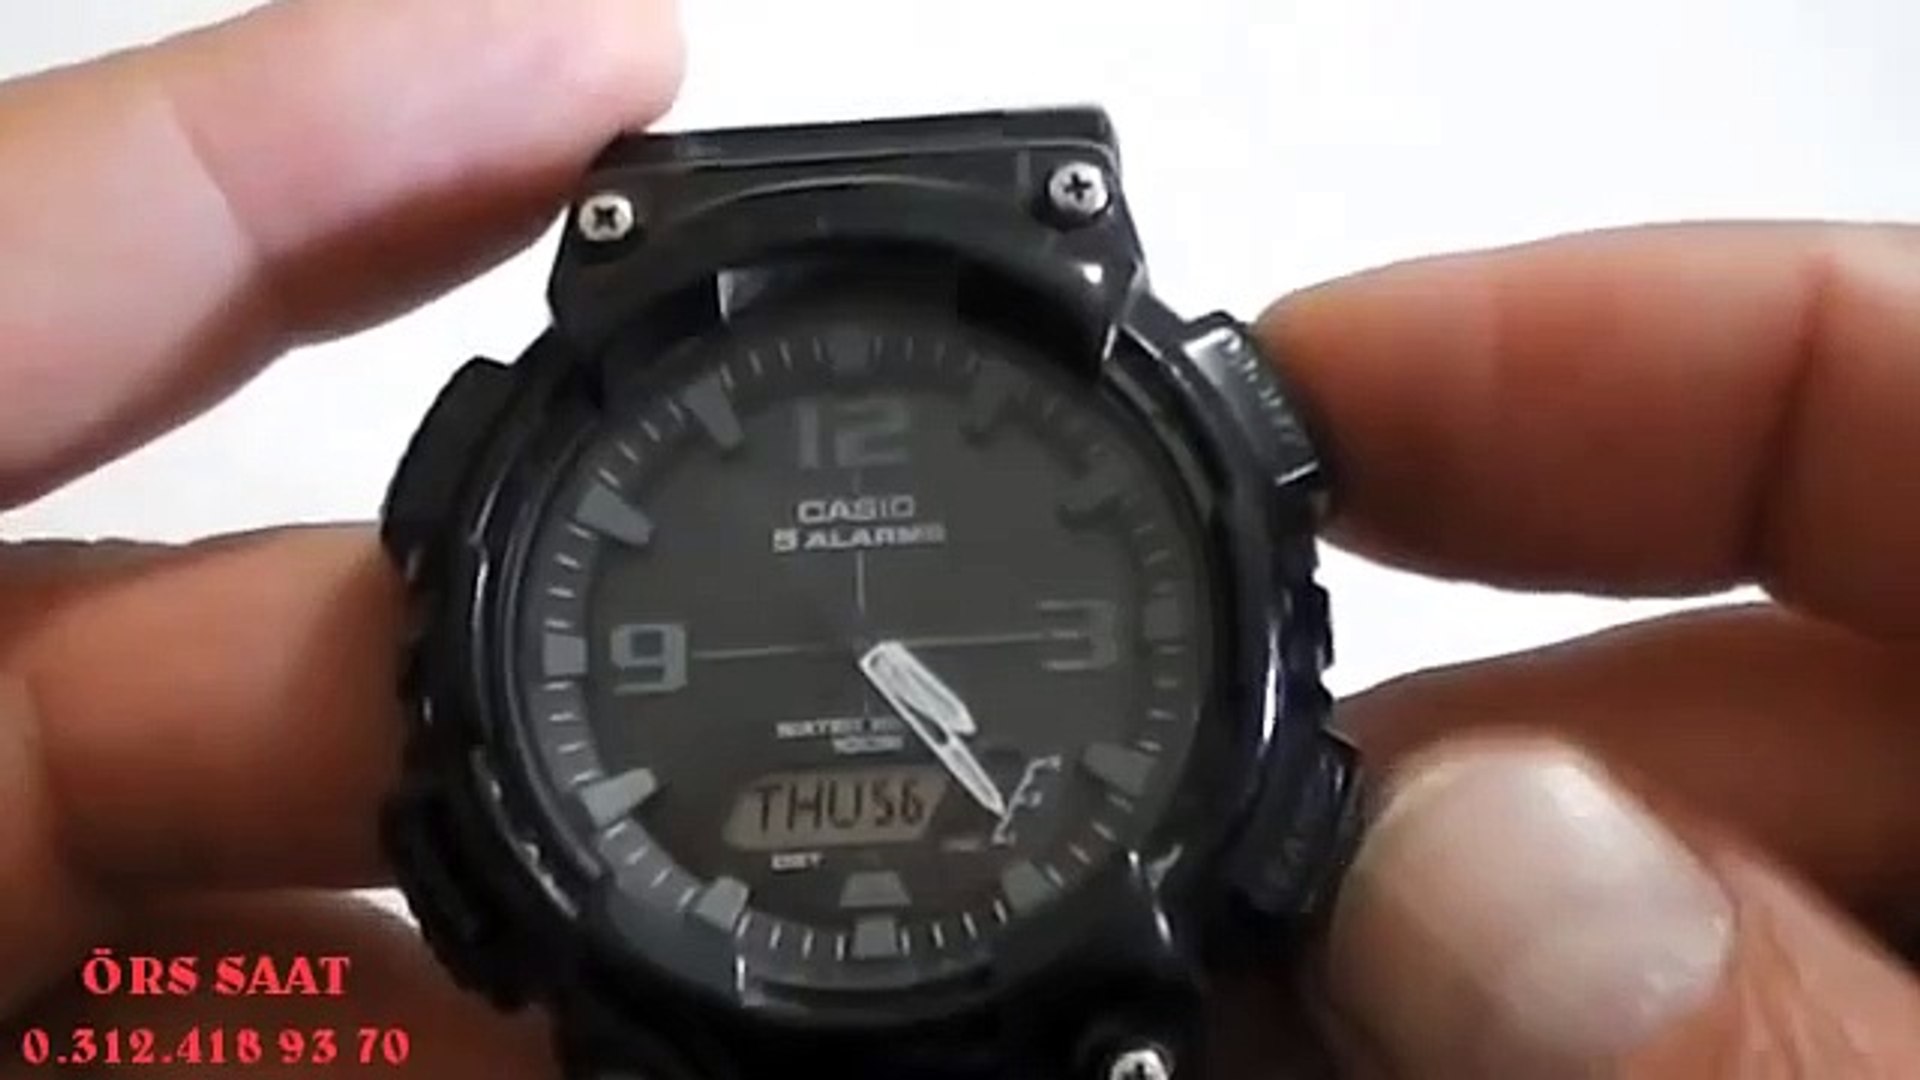 CASIO AQ-S810 AYAR VE ÖZELLİKLERİ / AQ-S810 SETTINGS AND FEATURES -  Dailymotion Video